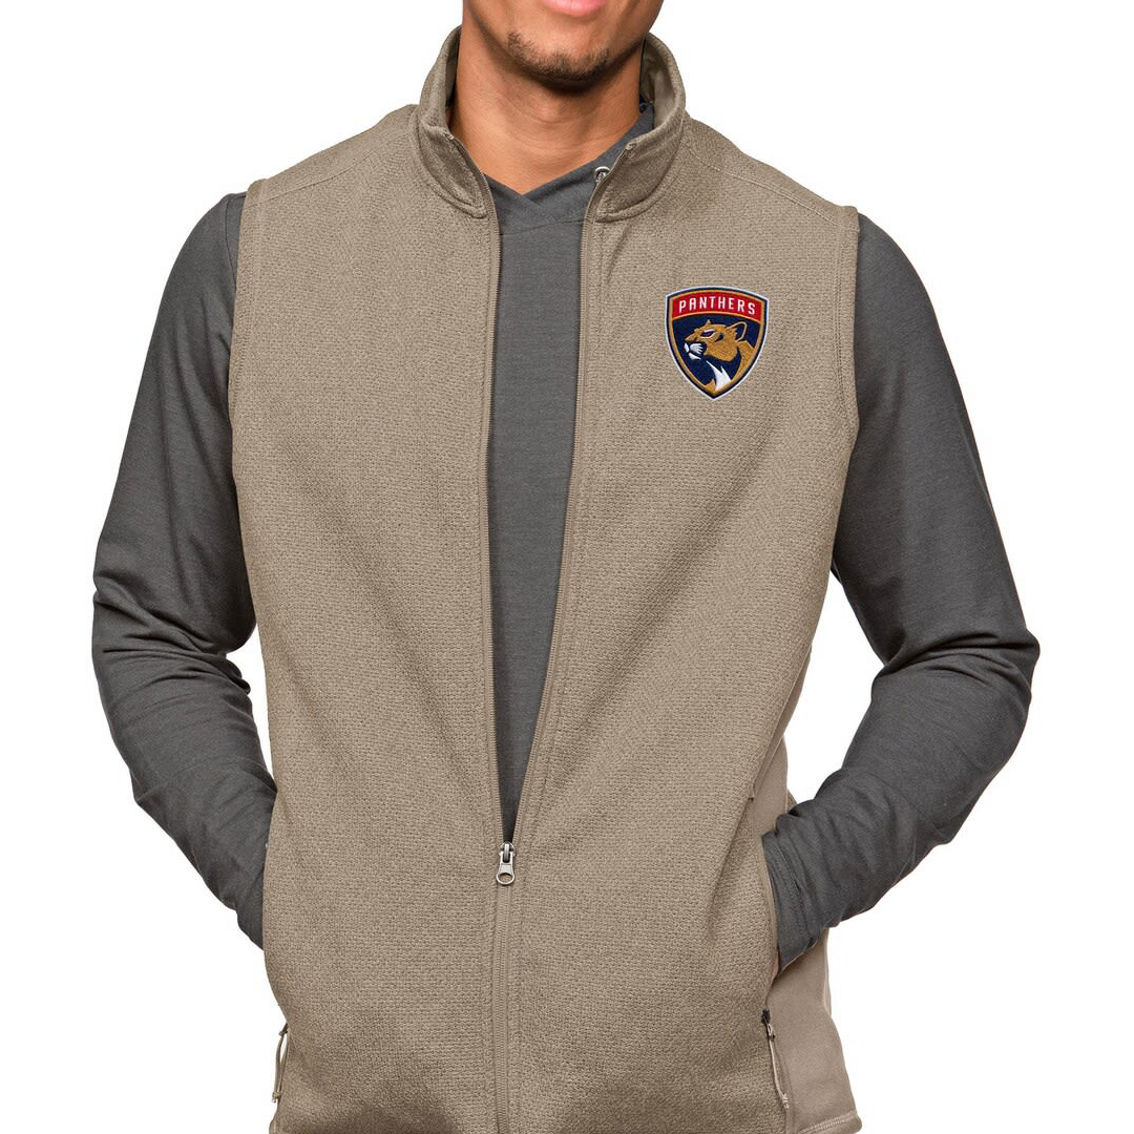 Antigua Men's Oatmeal Florida Panthers Course Full-Zip Vest - Image 2 of 2